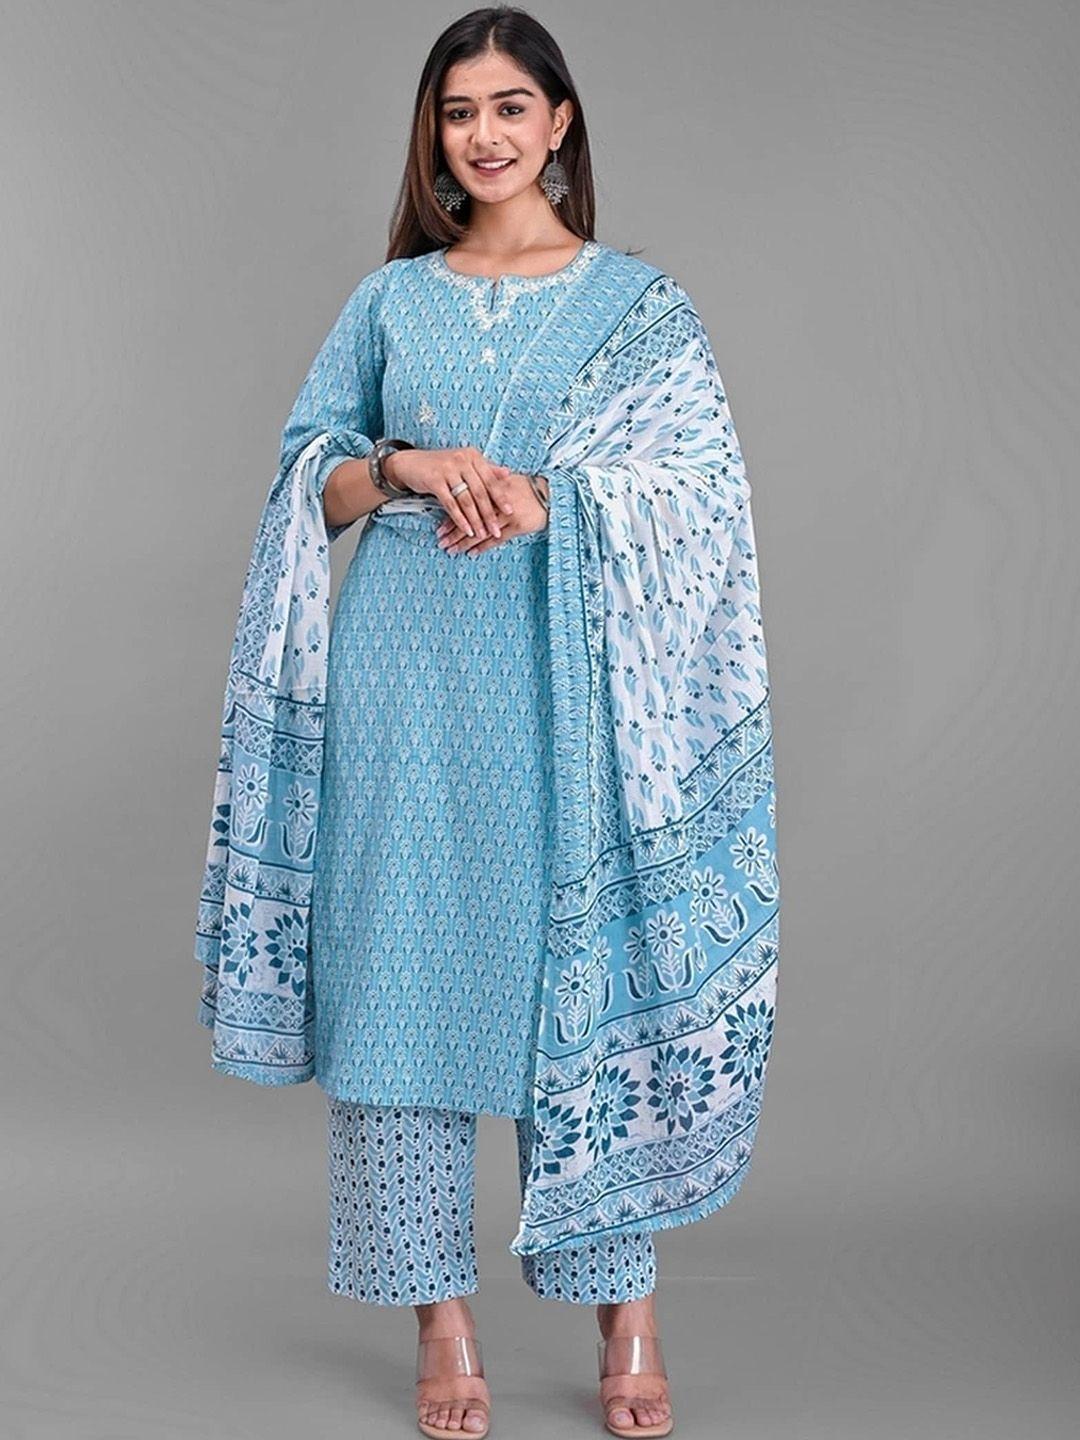 etnicawear women blue floral printed pure cotton kurta with palazzos & with dupatta